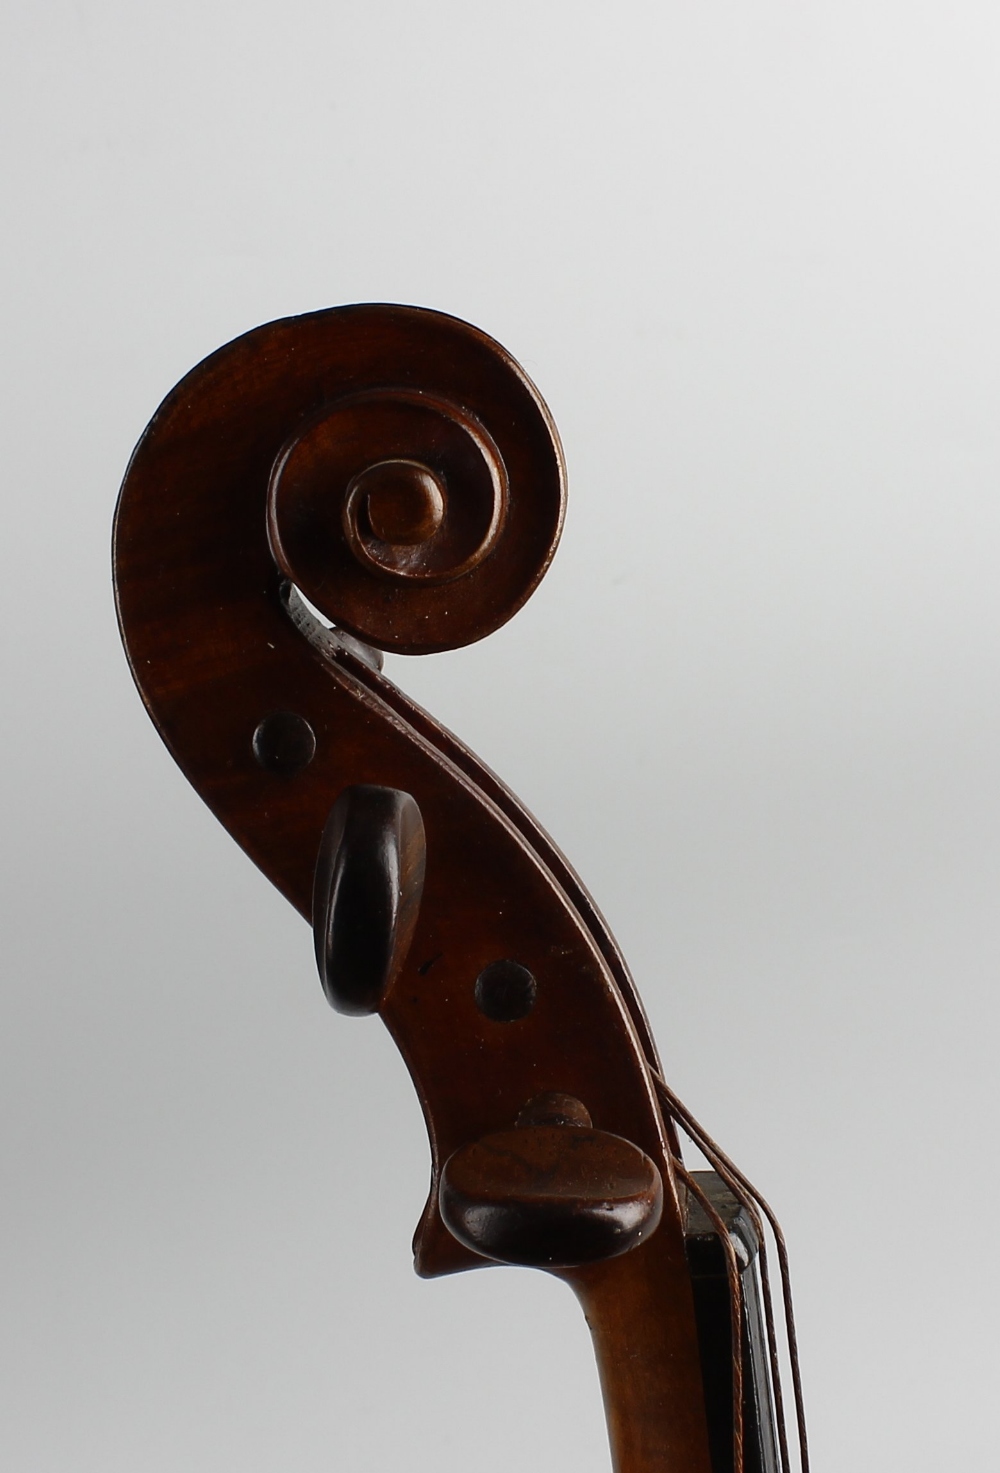 A Nicolas Bertholini violin, 24 (61 cm) long with bow. Heavily worn, scratched and marked. Strings - Image 5 of 9